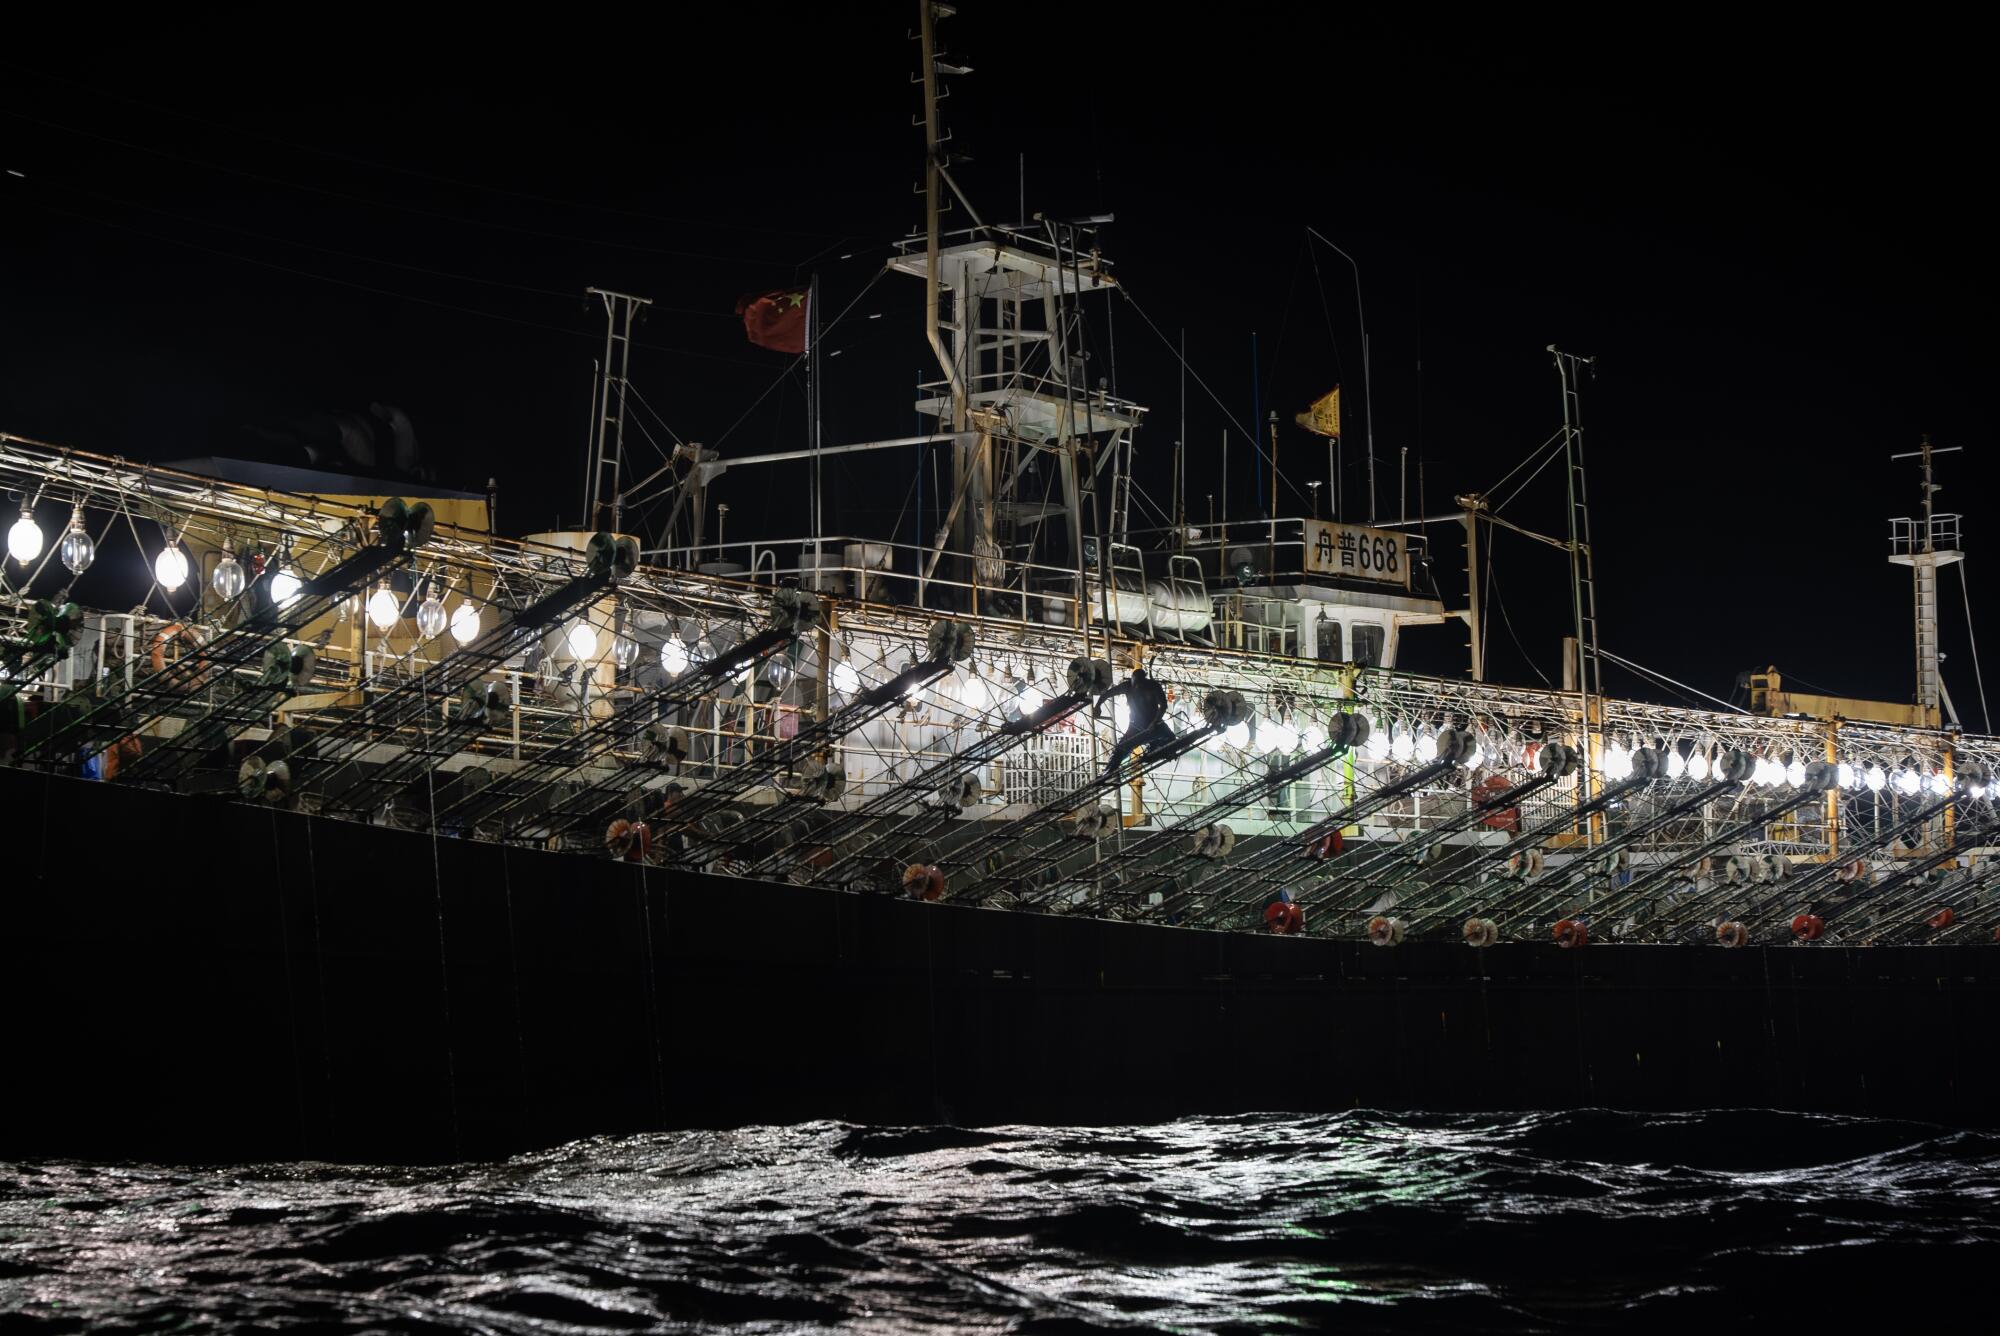 Hundreds of bright light bulbs adorn the side of a ship in darkness